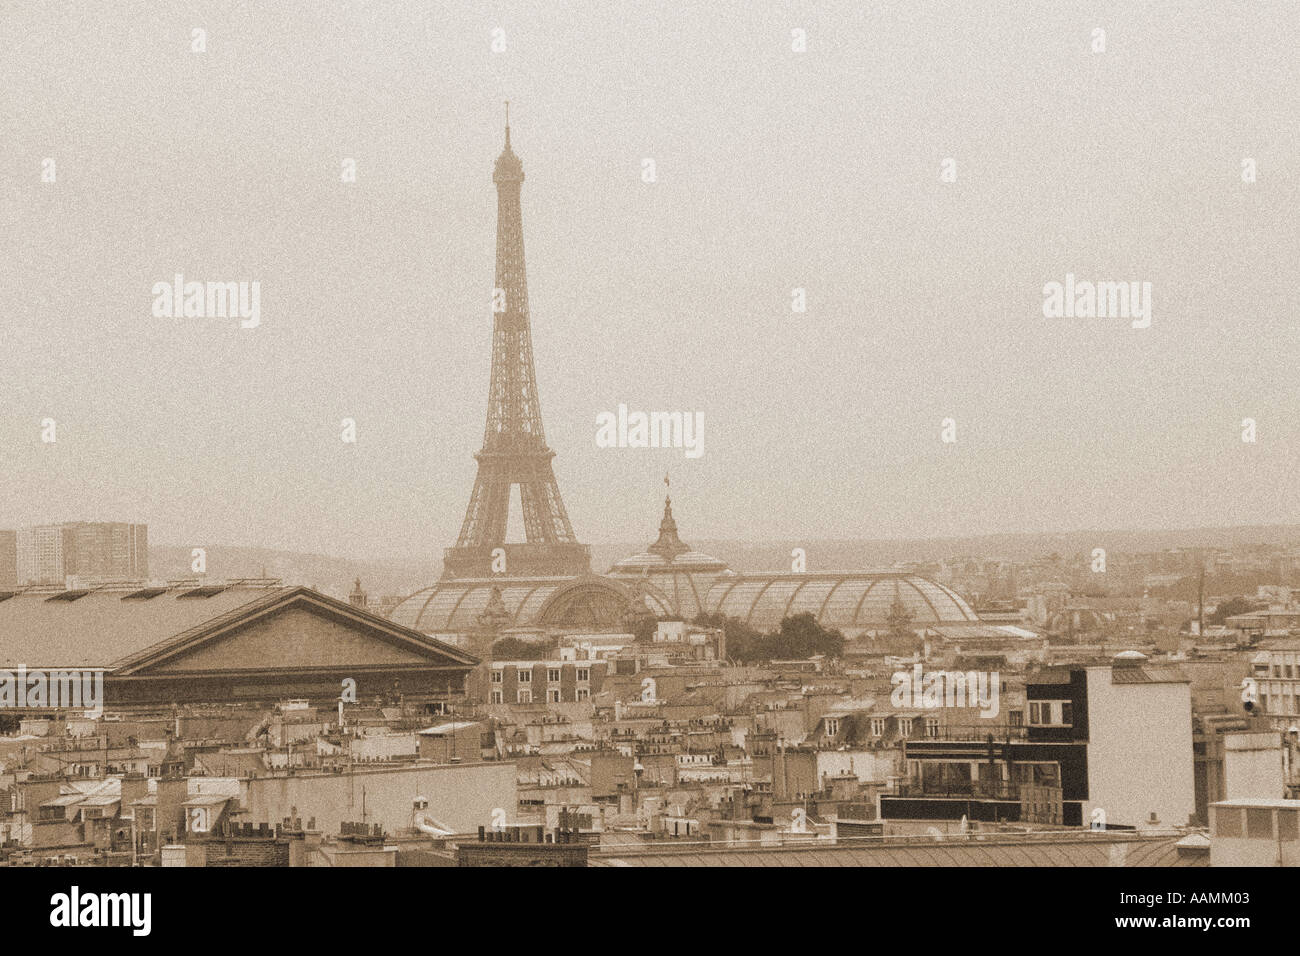 Sepia landscape shot of Eiffel Tower across rooftops of Paris France Stock Photo